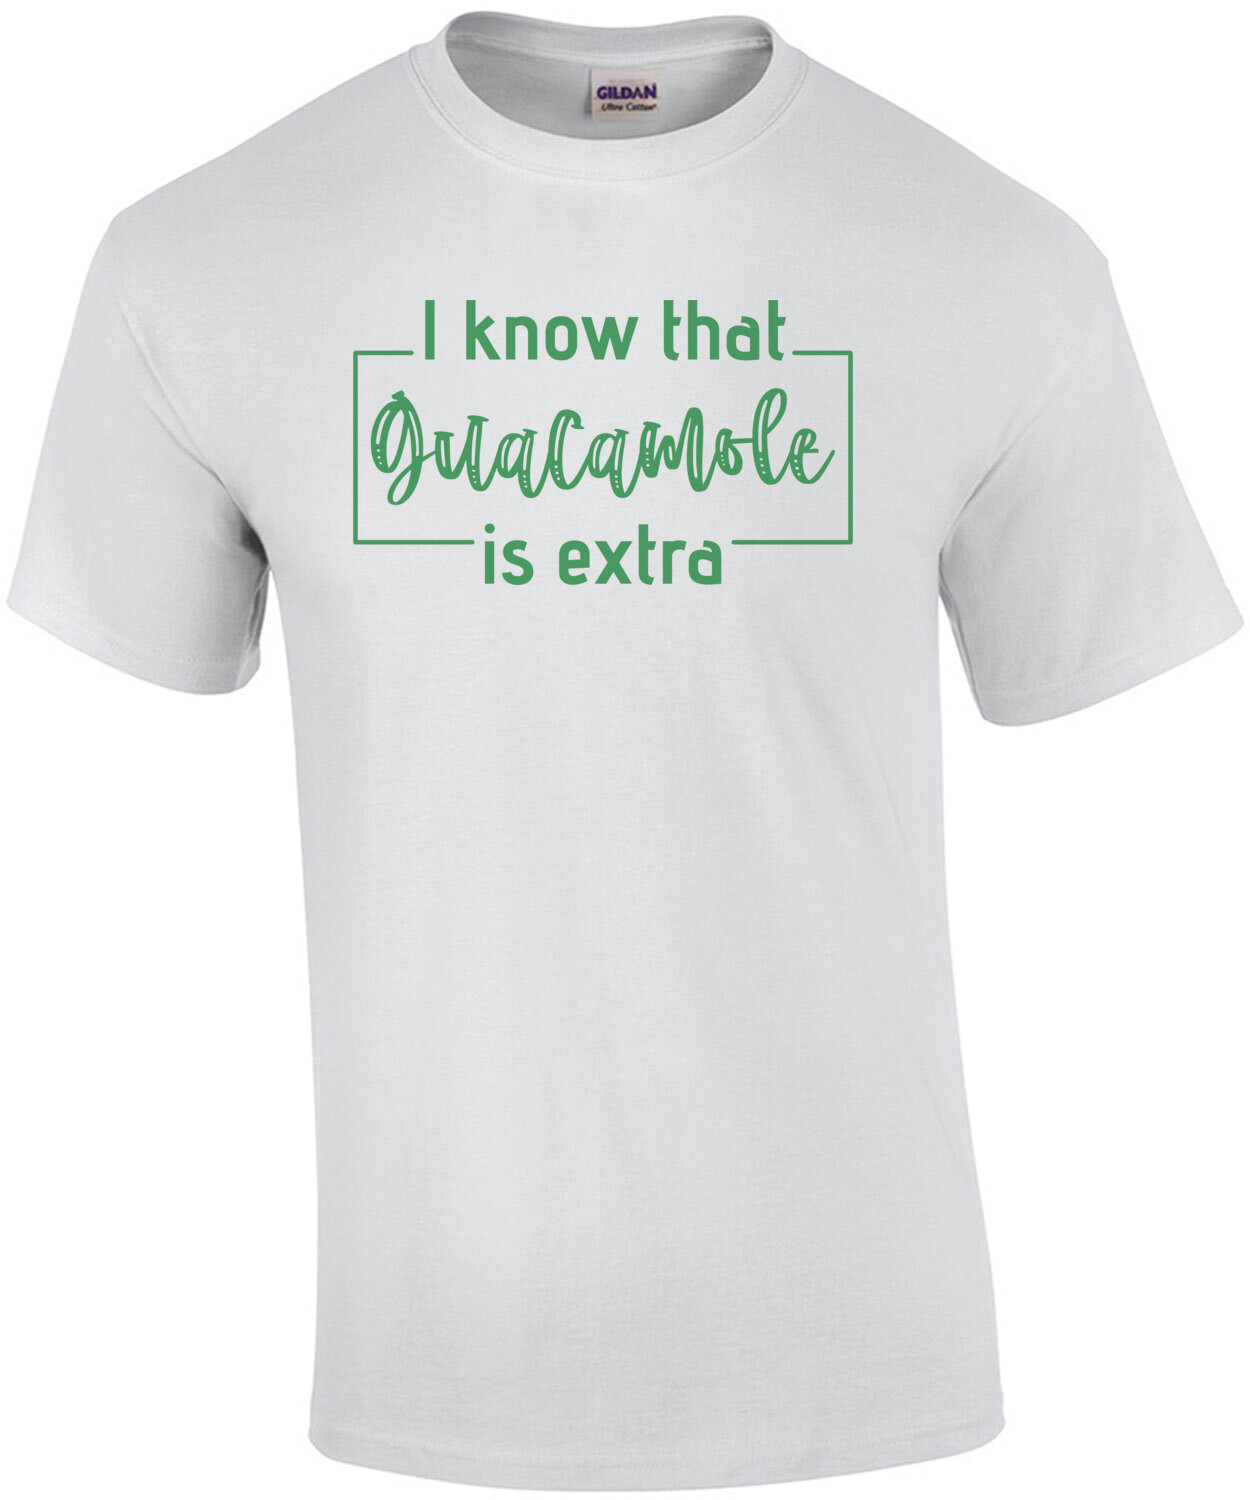 I know that guacamole is extra! Shirt